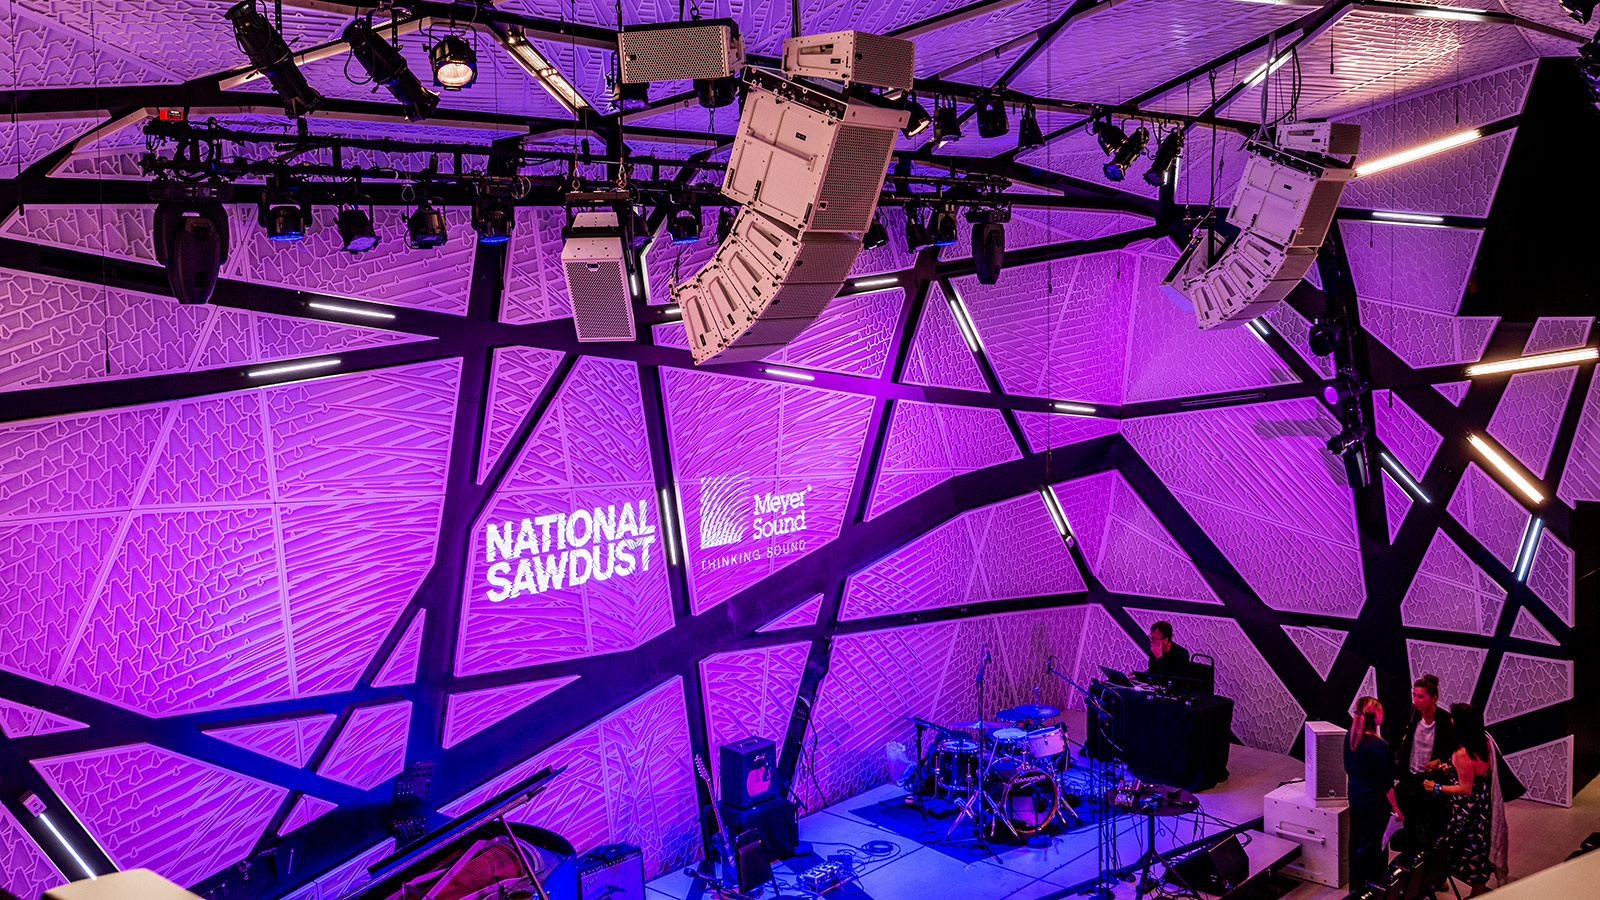 Meyer Sound Partnership with National Sawdust Opens New Realms for Musical Innovation